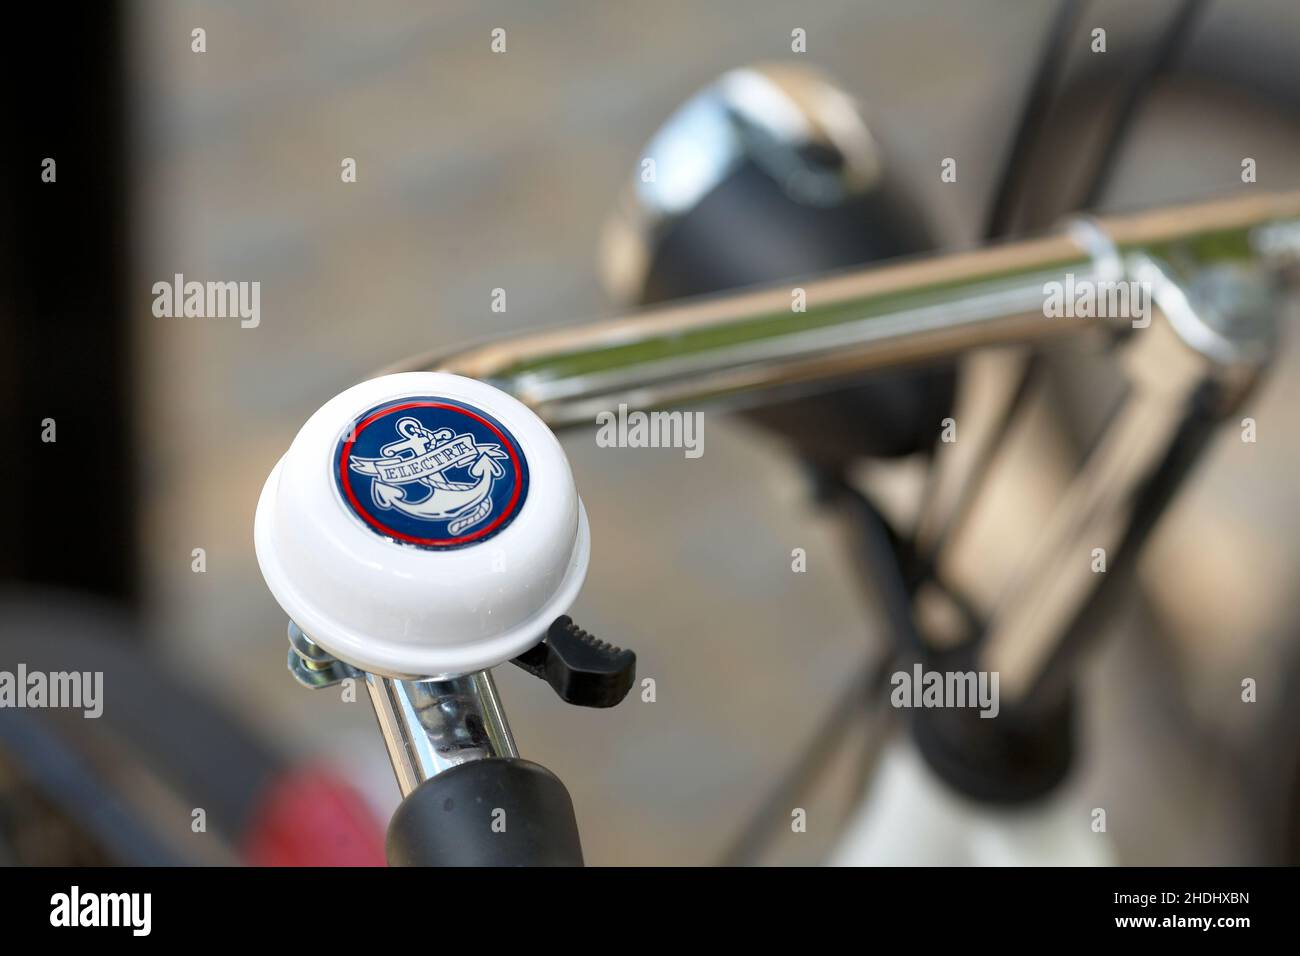 Ship anchor bicycle bell .Bicycle handlebar with bell with blurred background. Stock Photo